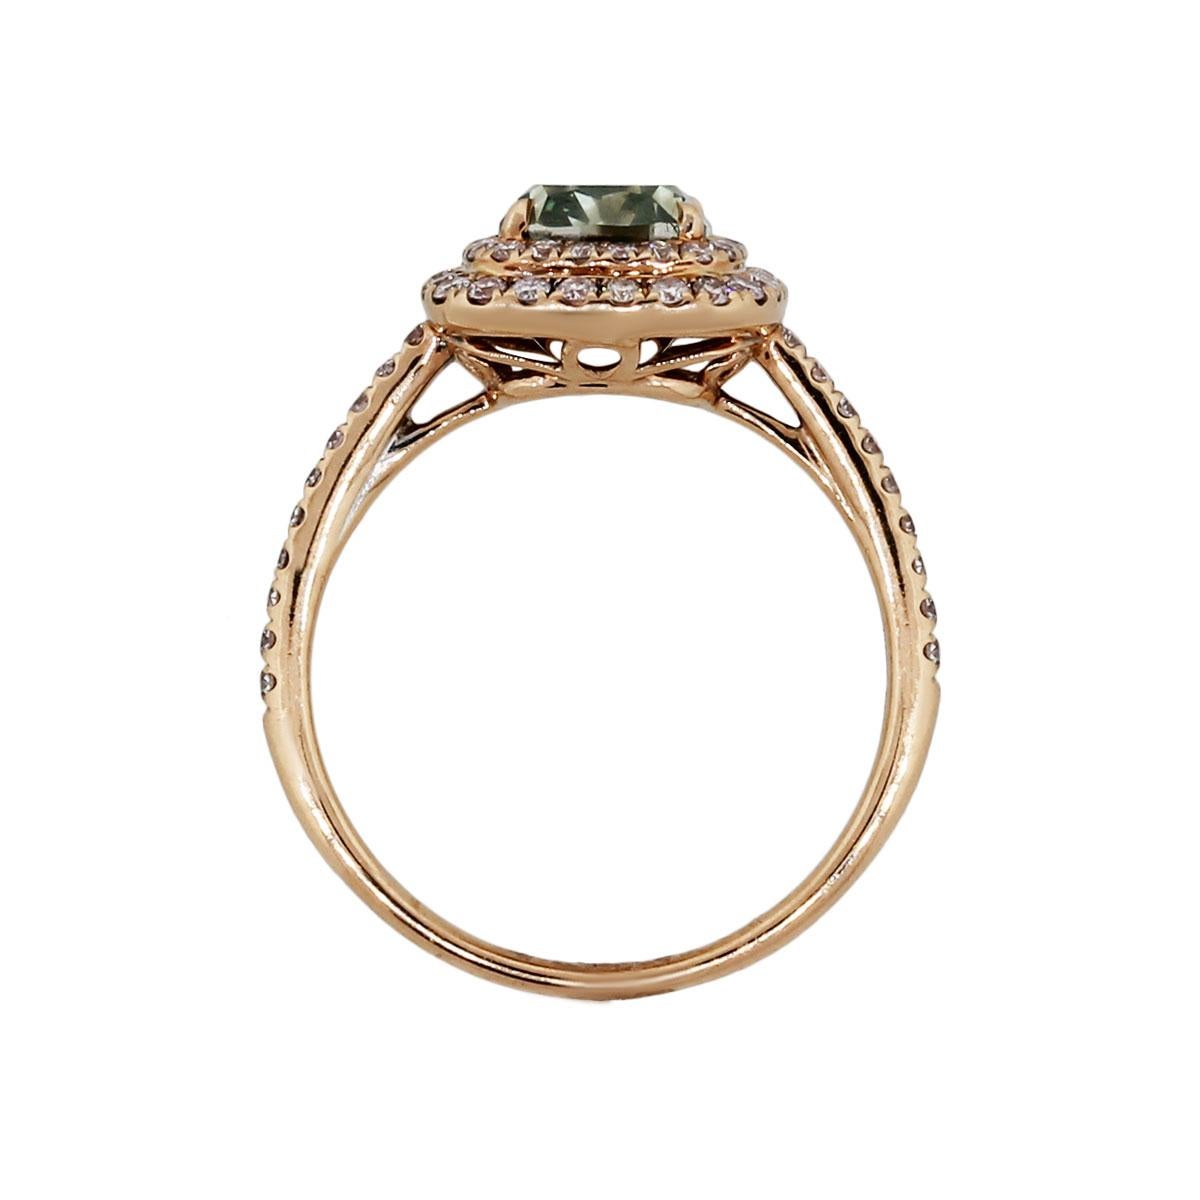 Material: 18k rose gold
Center Diamond Details: GIA certified 1.81ct cushion cut fancy gray-yellowish green diamond, GIA certificate #5172107649.
Additional Diamond Details: Approximately 0.60ctw of round brilliant diamonds.
Ring Size: 6.75 (can be